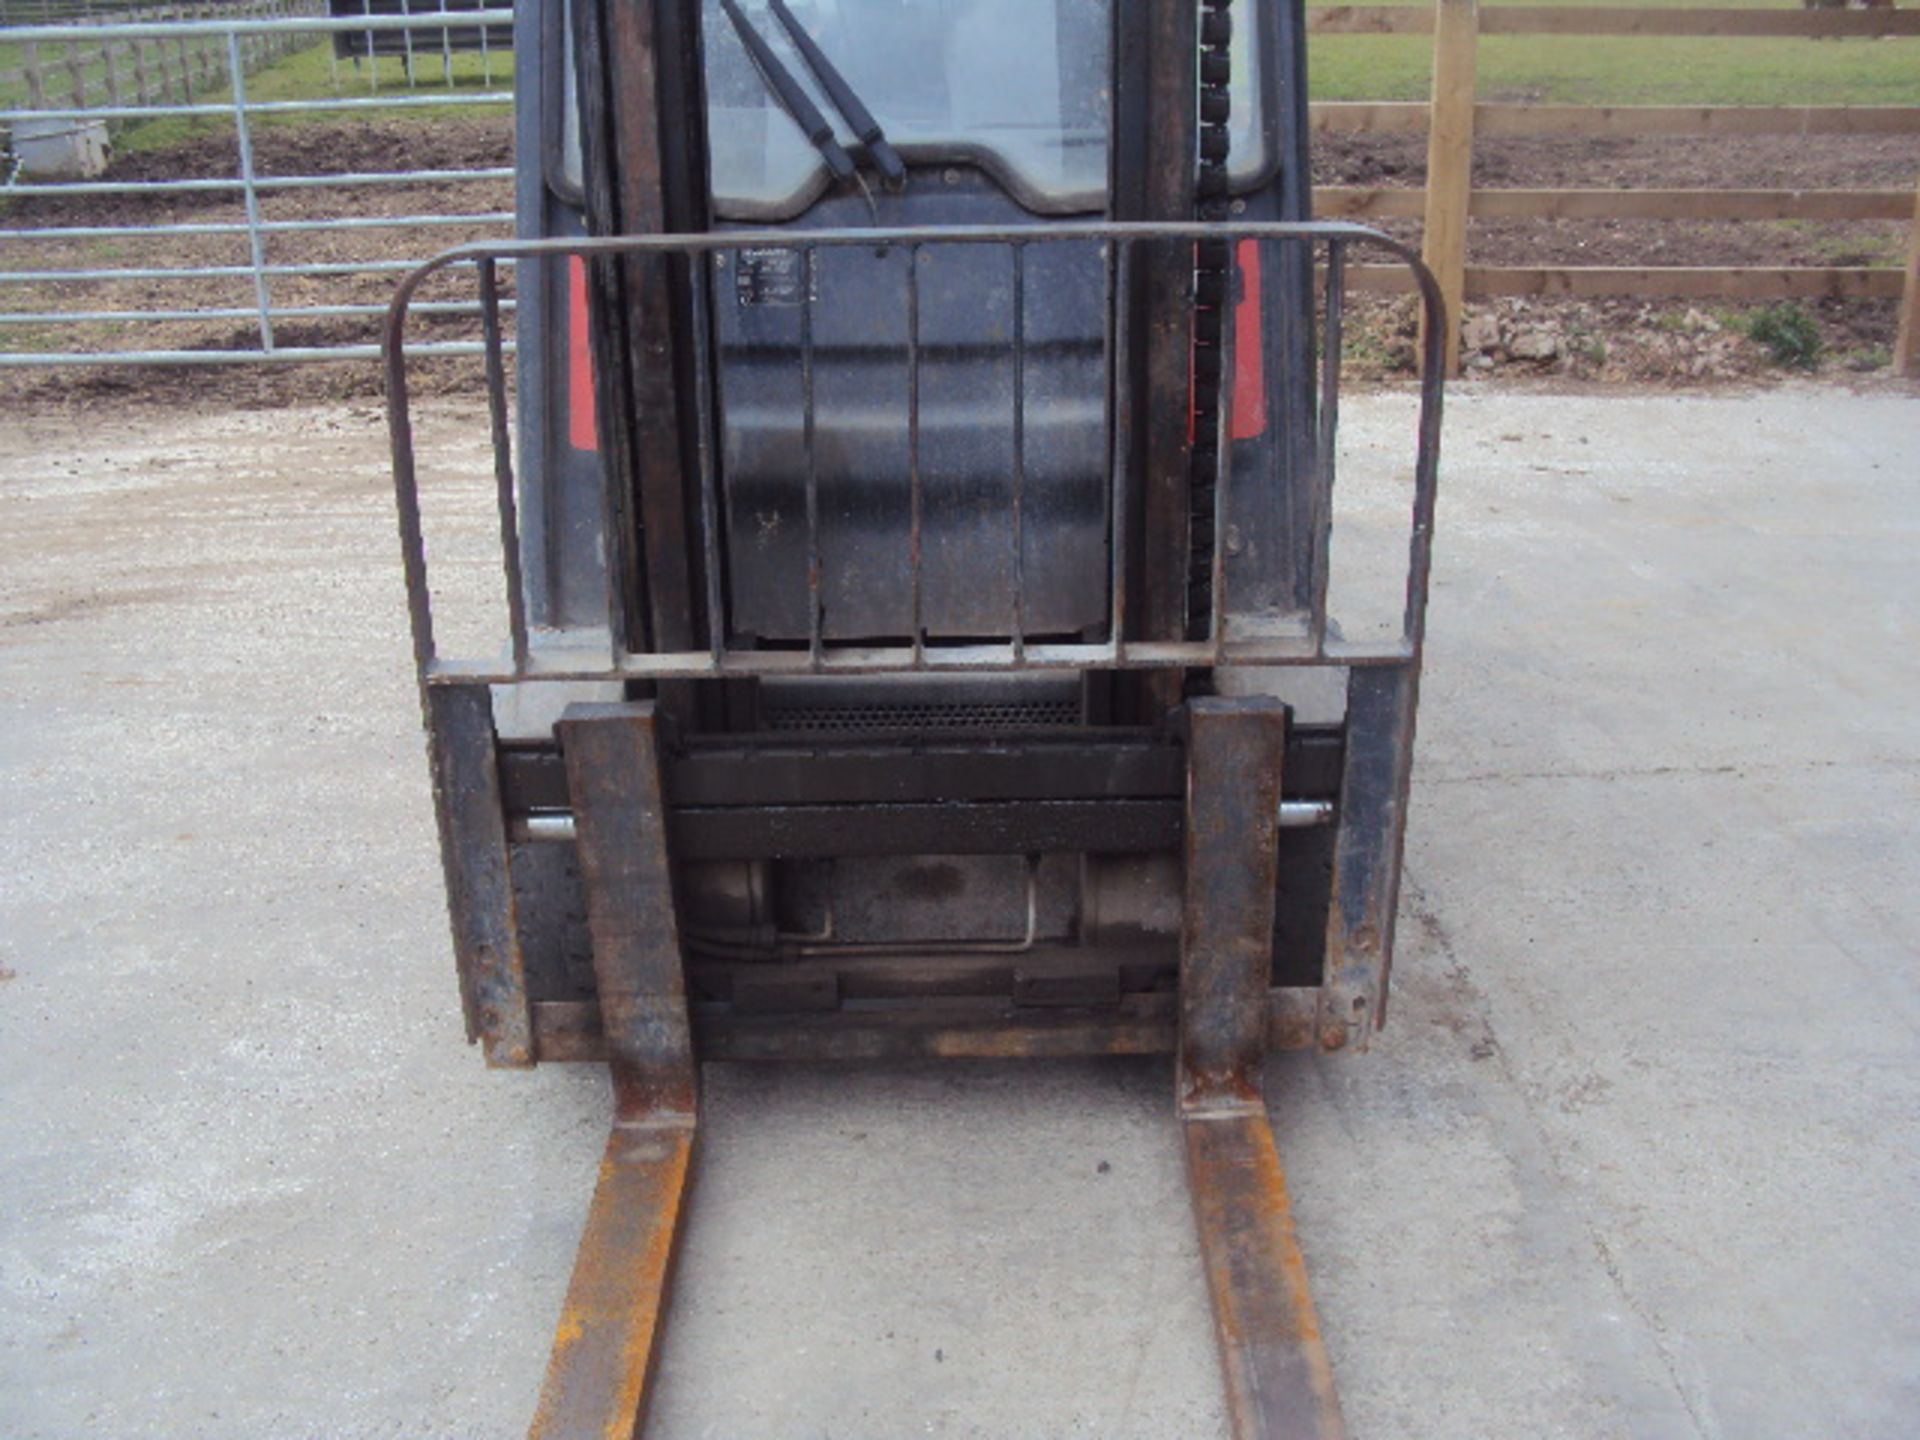 2007 LINDE H16 1.6t diesel driven forklift truck S/n: H2X391V02312 (1904 recorded hours) with duplex - Image 5 of 9